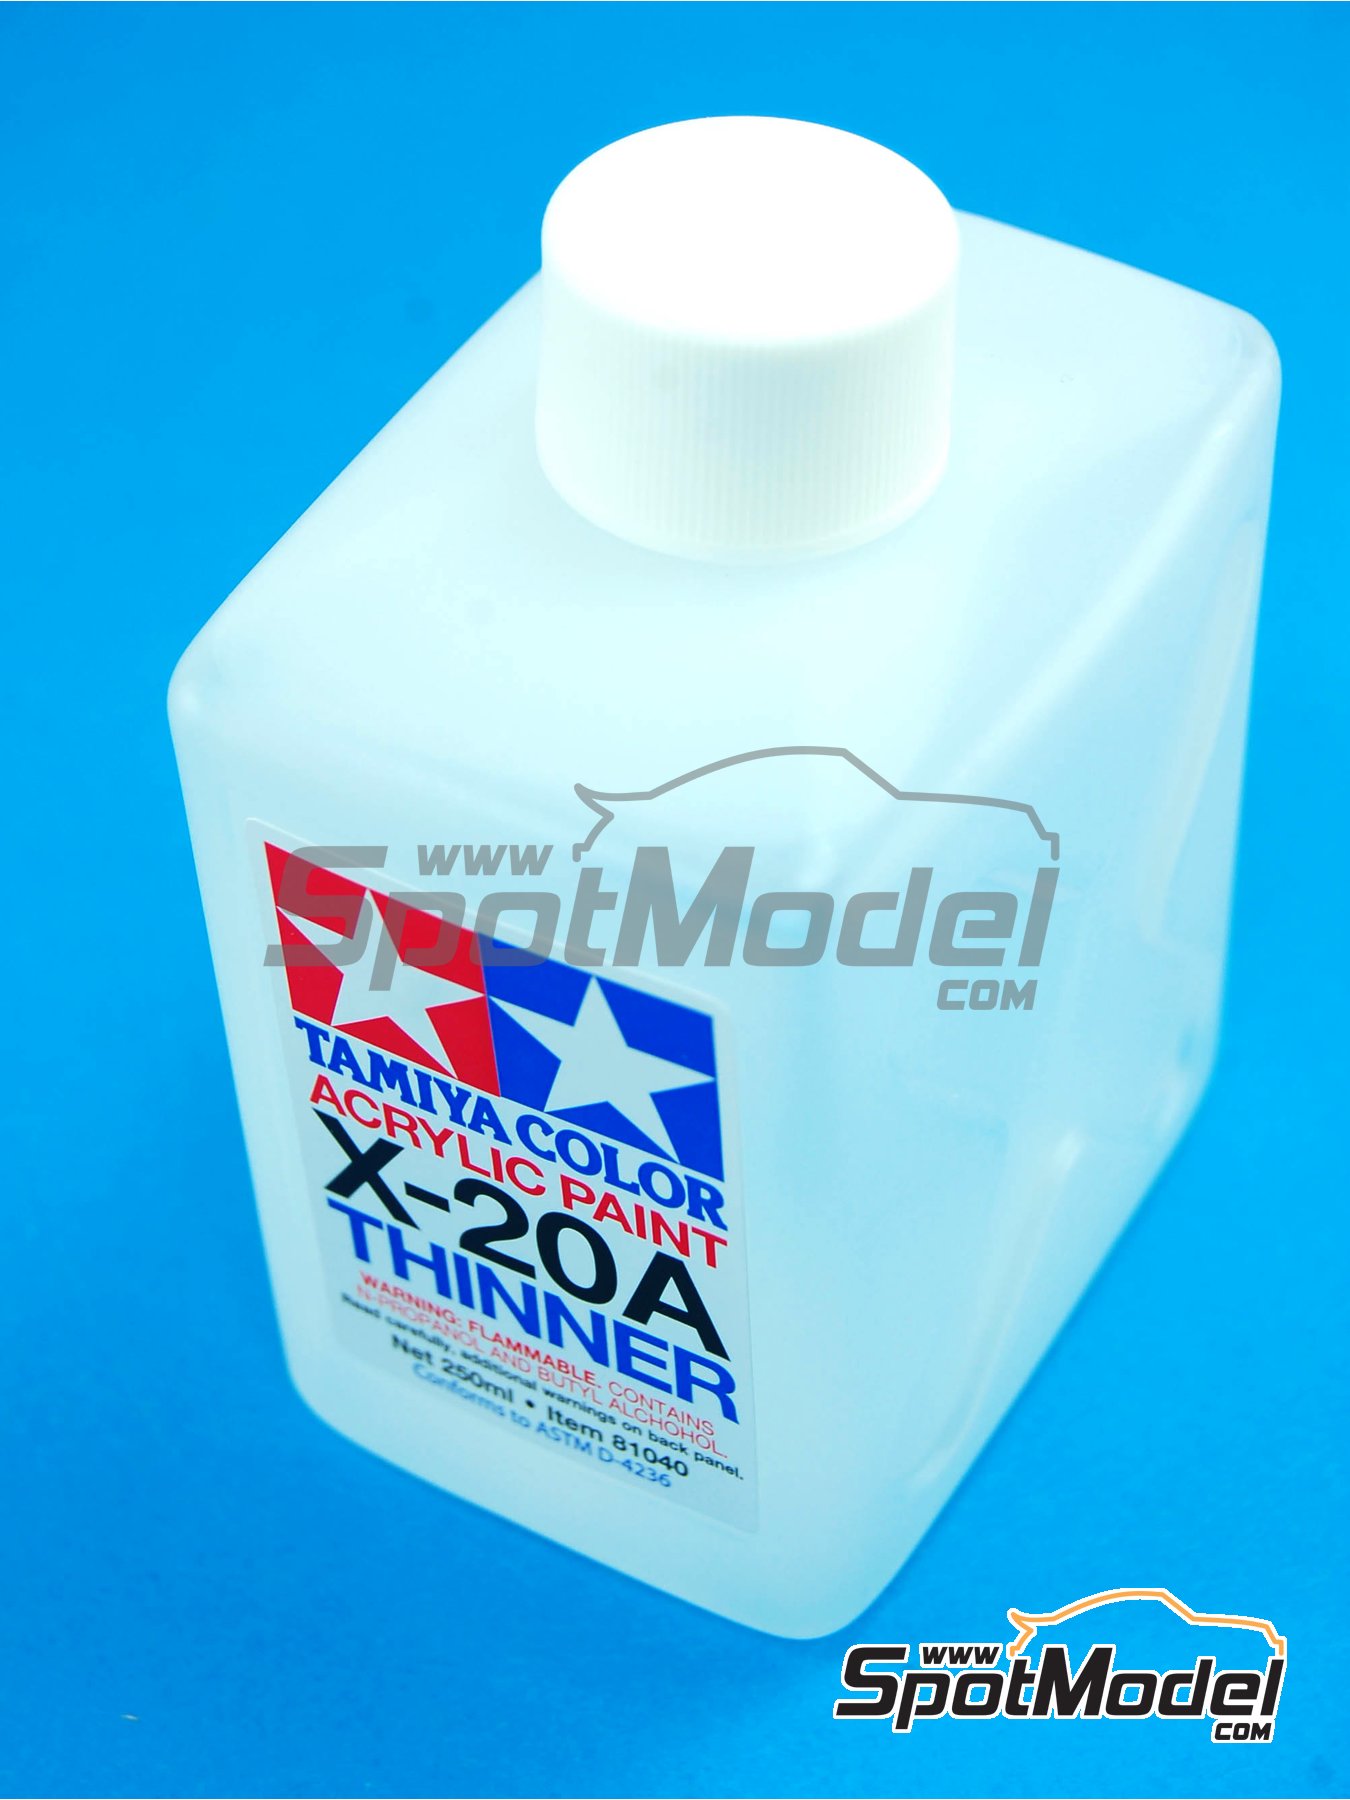 Tamiya 81040 Acrylic Paint Thinner X-20a 250ml Bottle for sale online